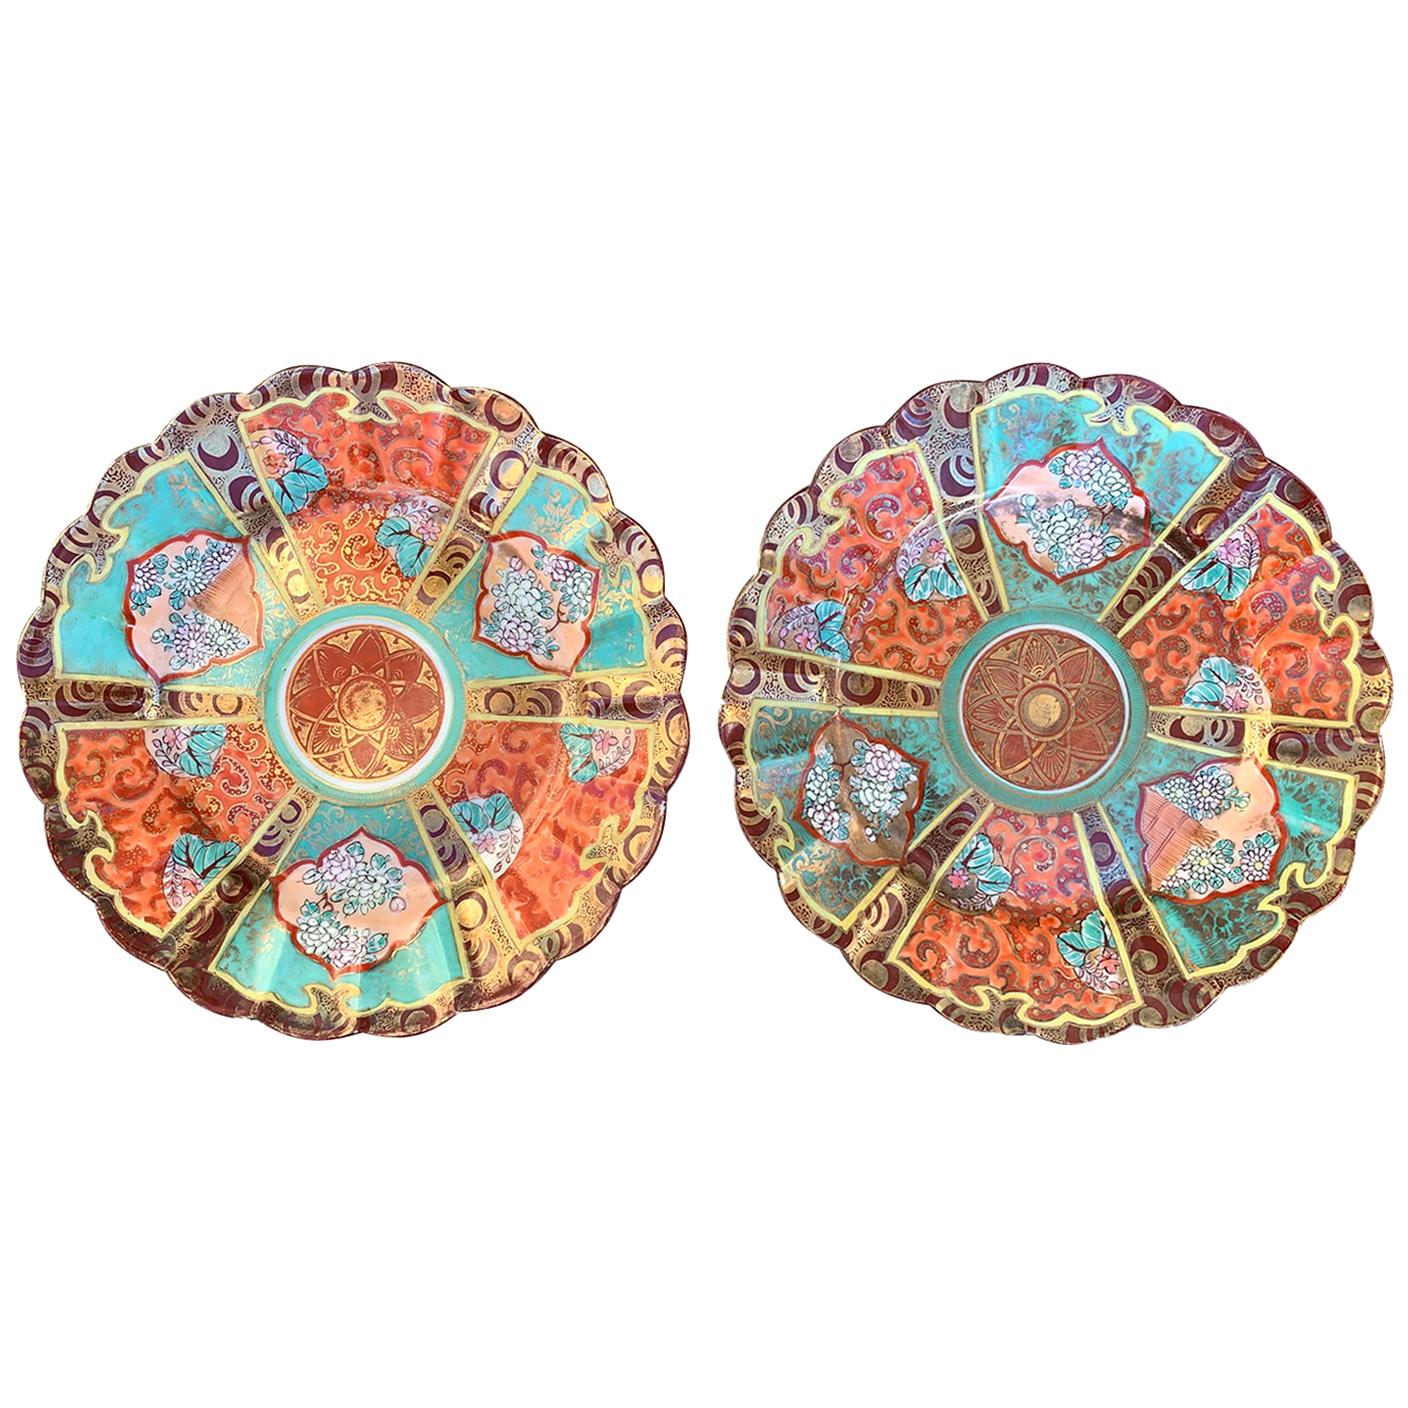 Pair of Chinese Colorful Porcelain Gilt Plates, Scalloped Edge, Old Label